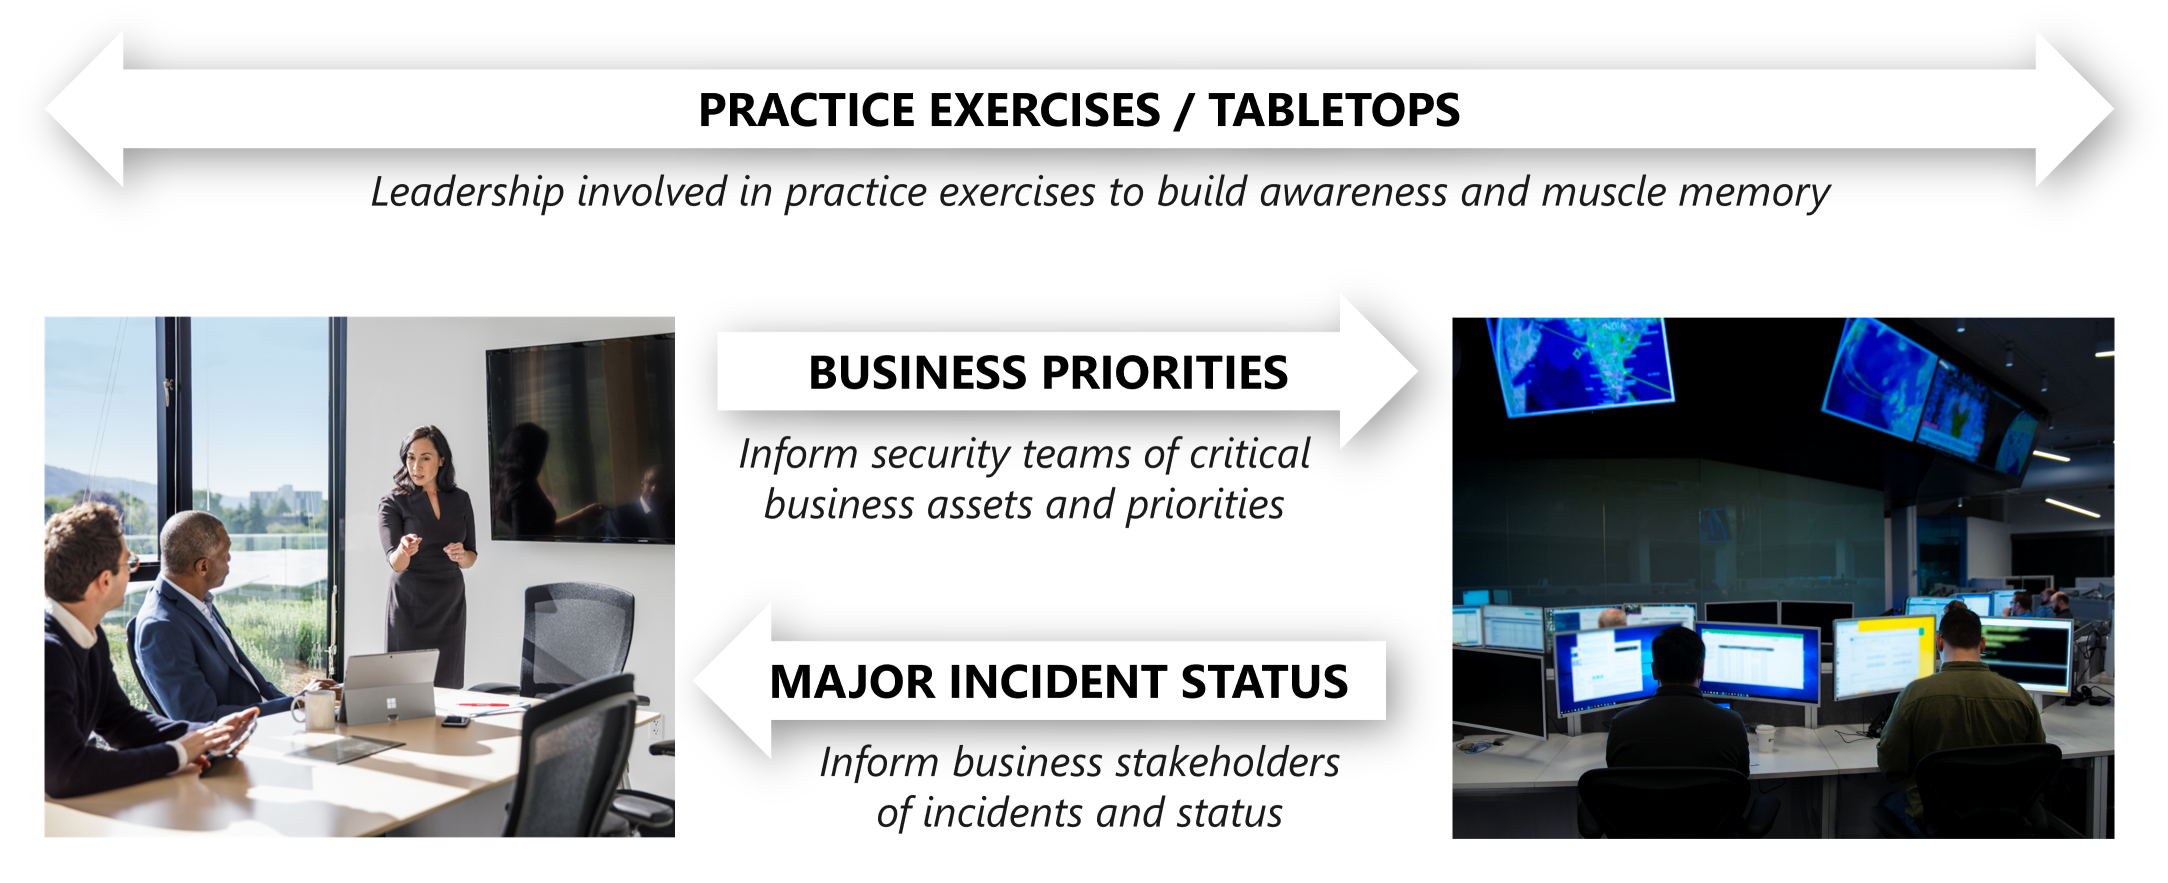 Diagram that shows the SecOps touchpoints practice exercises, business priorities, and major incident status.